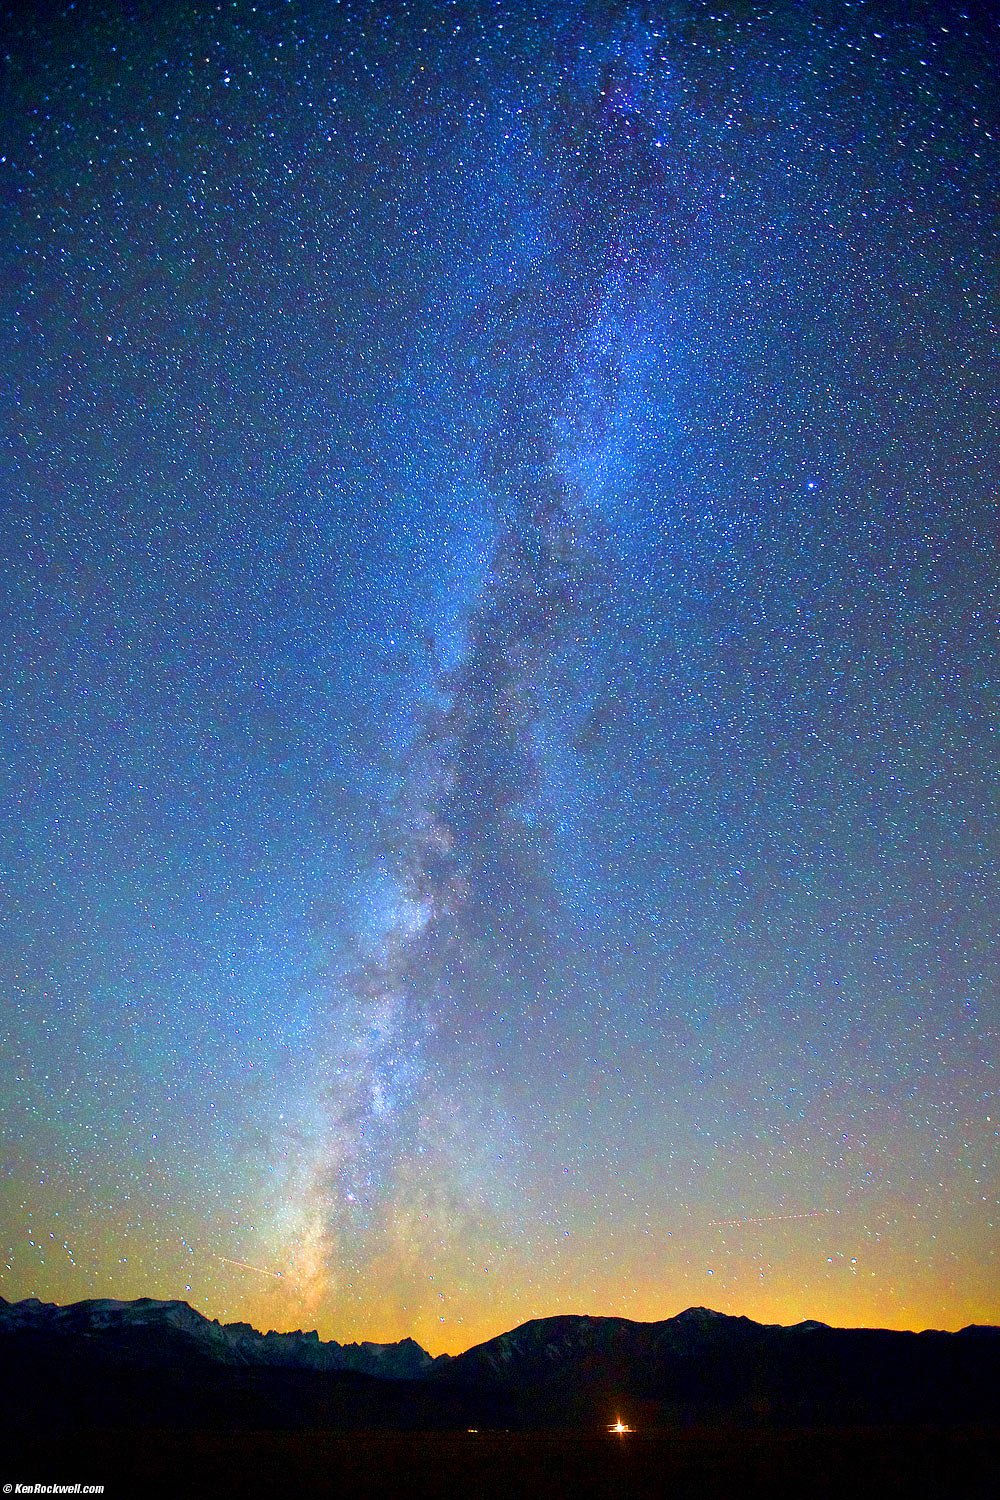 The Milky Way as Seen from South-Southwest of Bridgeport